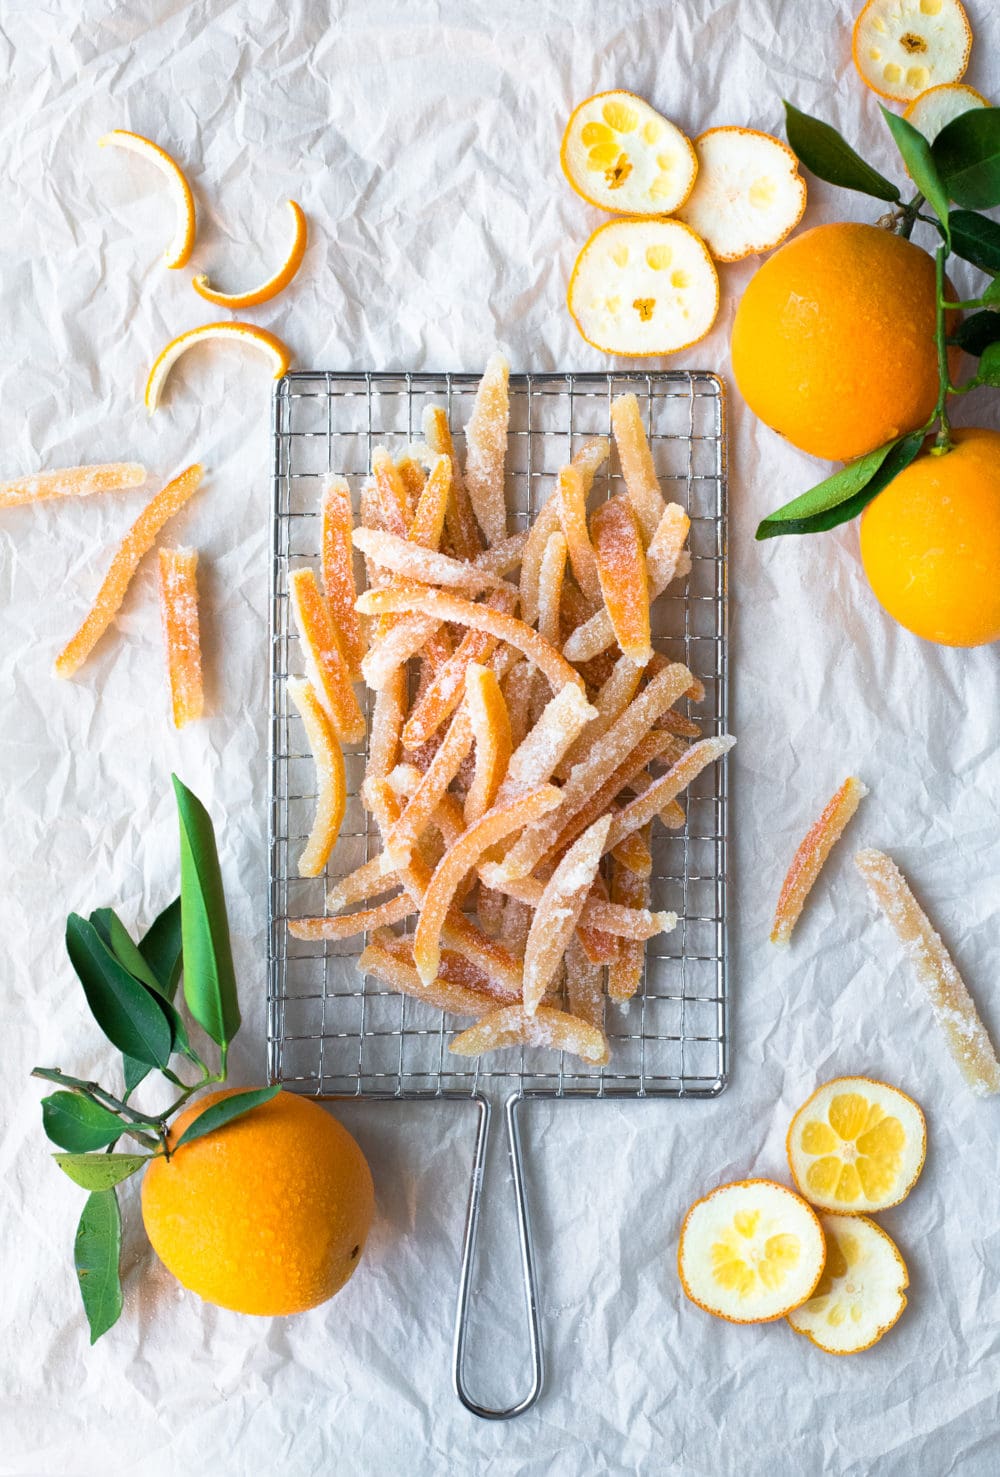 Overhead view of strips of candied orange peel on a safety grater, surrounded by more oranges and peel cuttings.